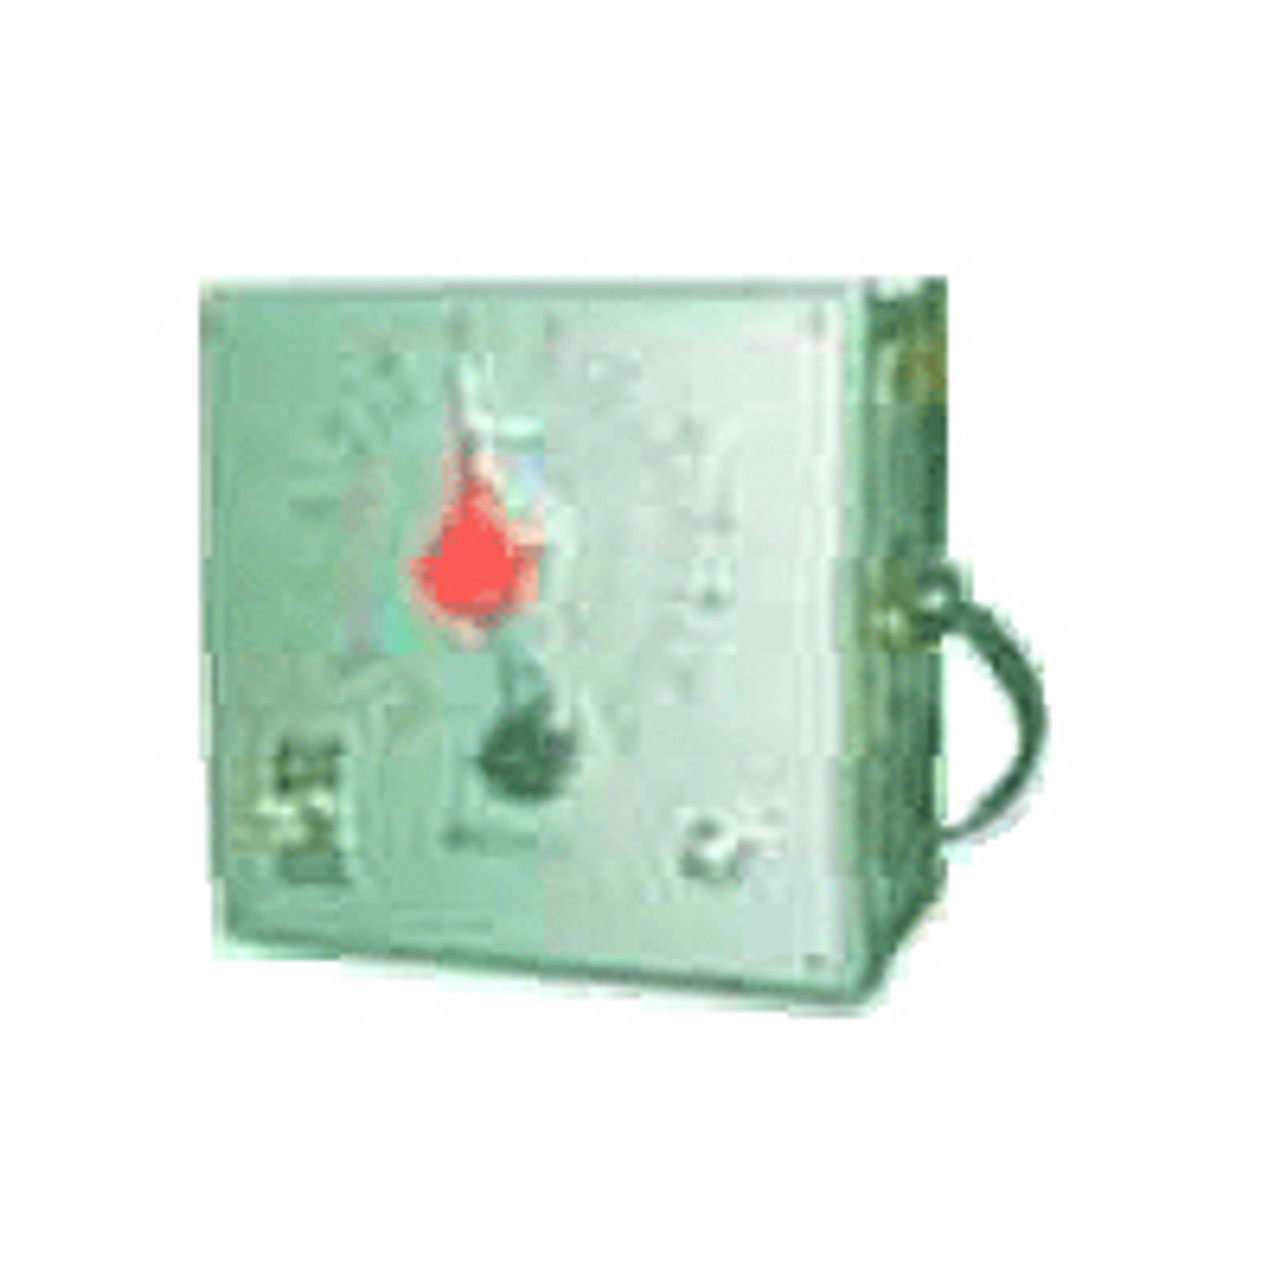 Industrial Timer P-3H-120/60 Interval Timers